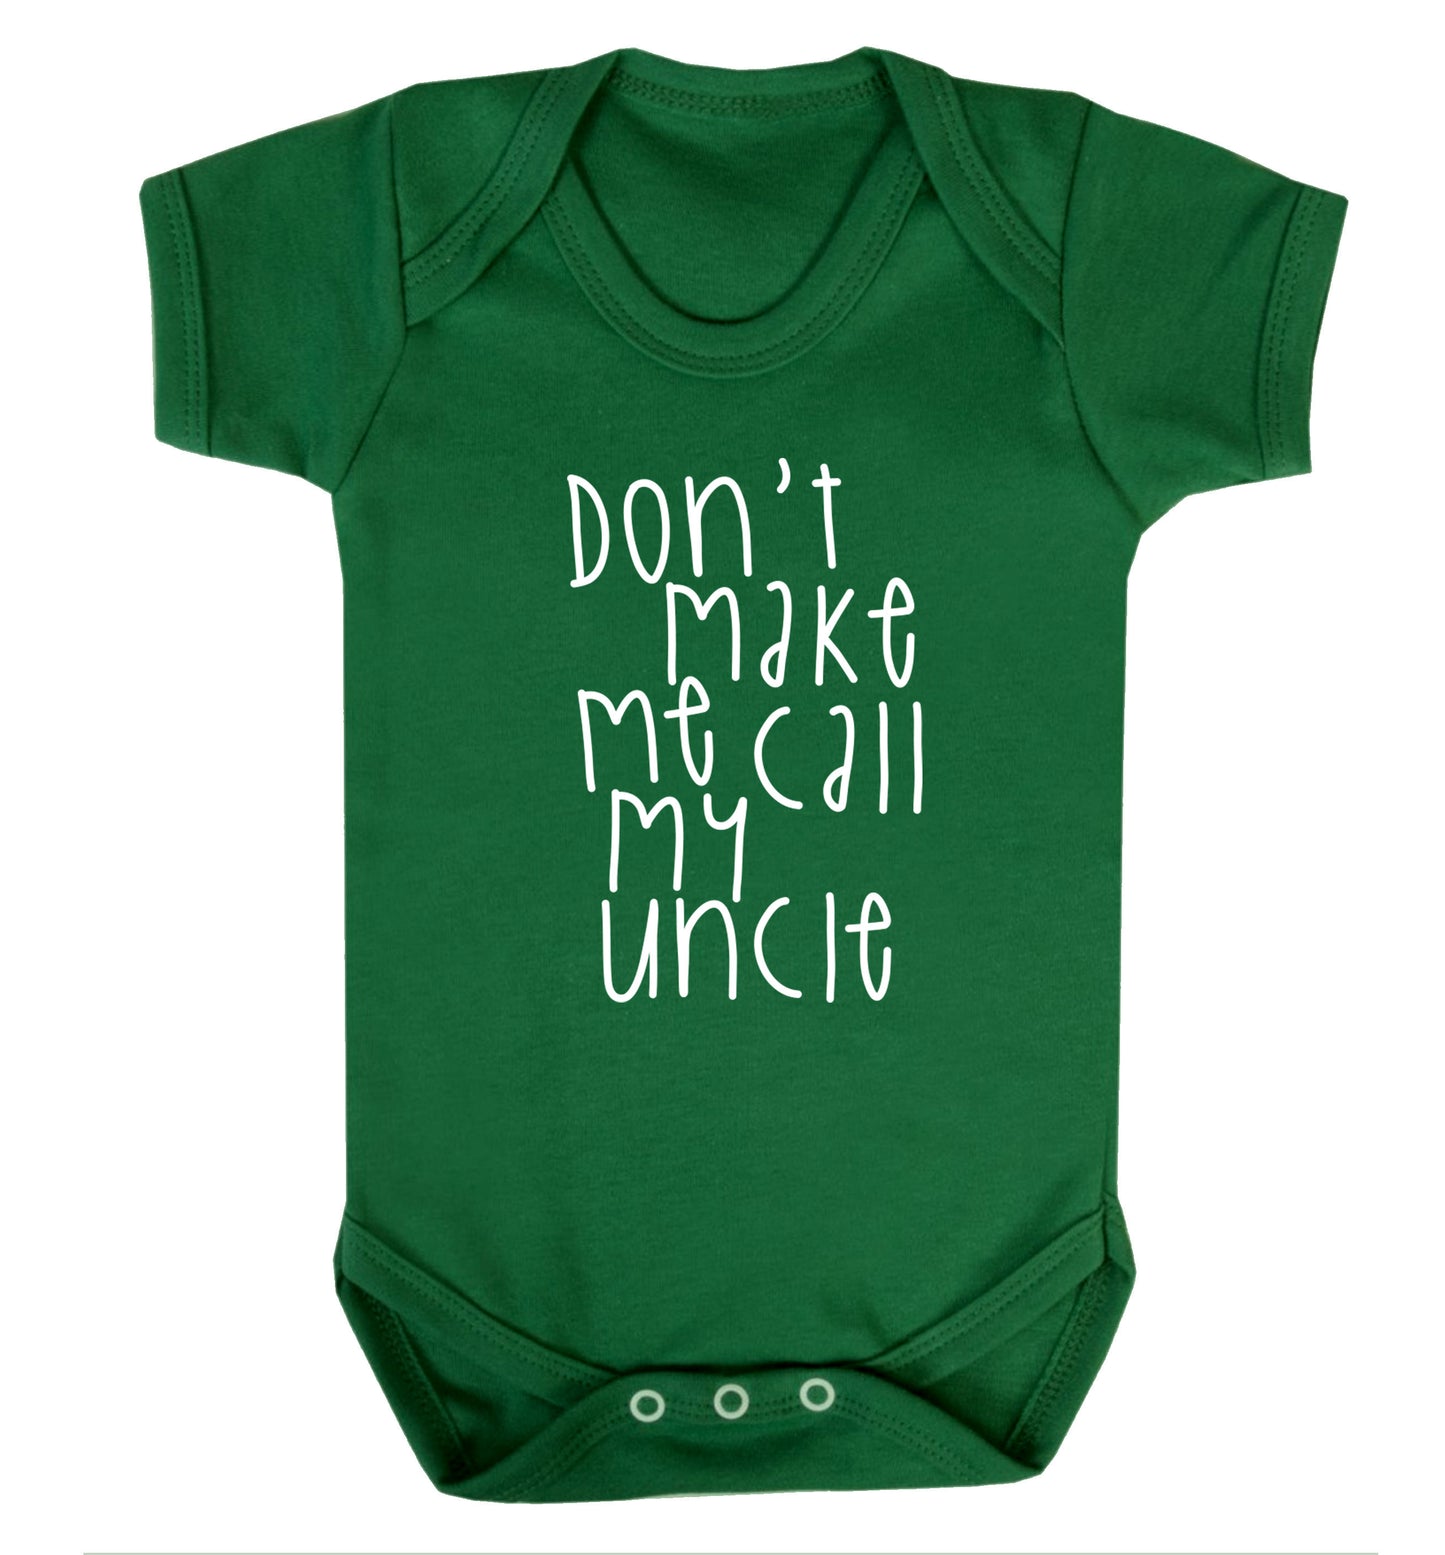 Don't make me call my uncle Baby Vest green 18-24 months